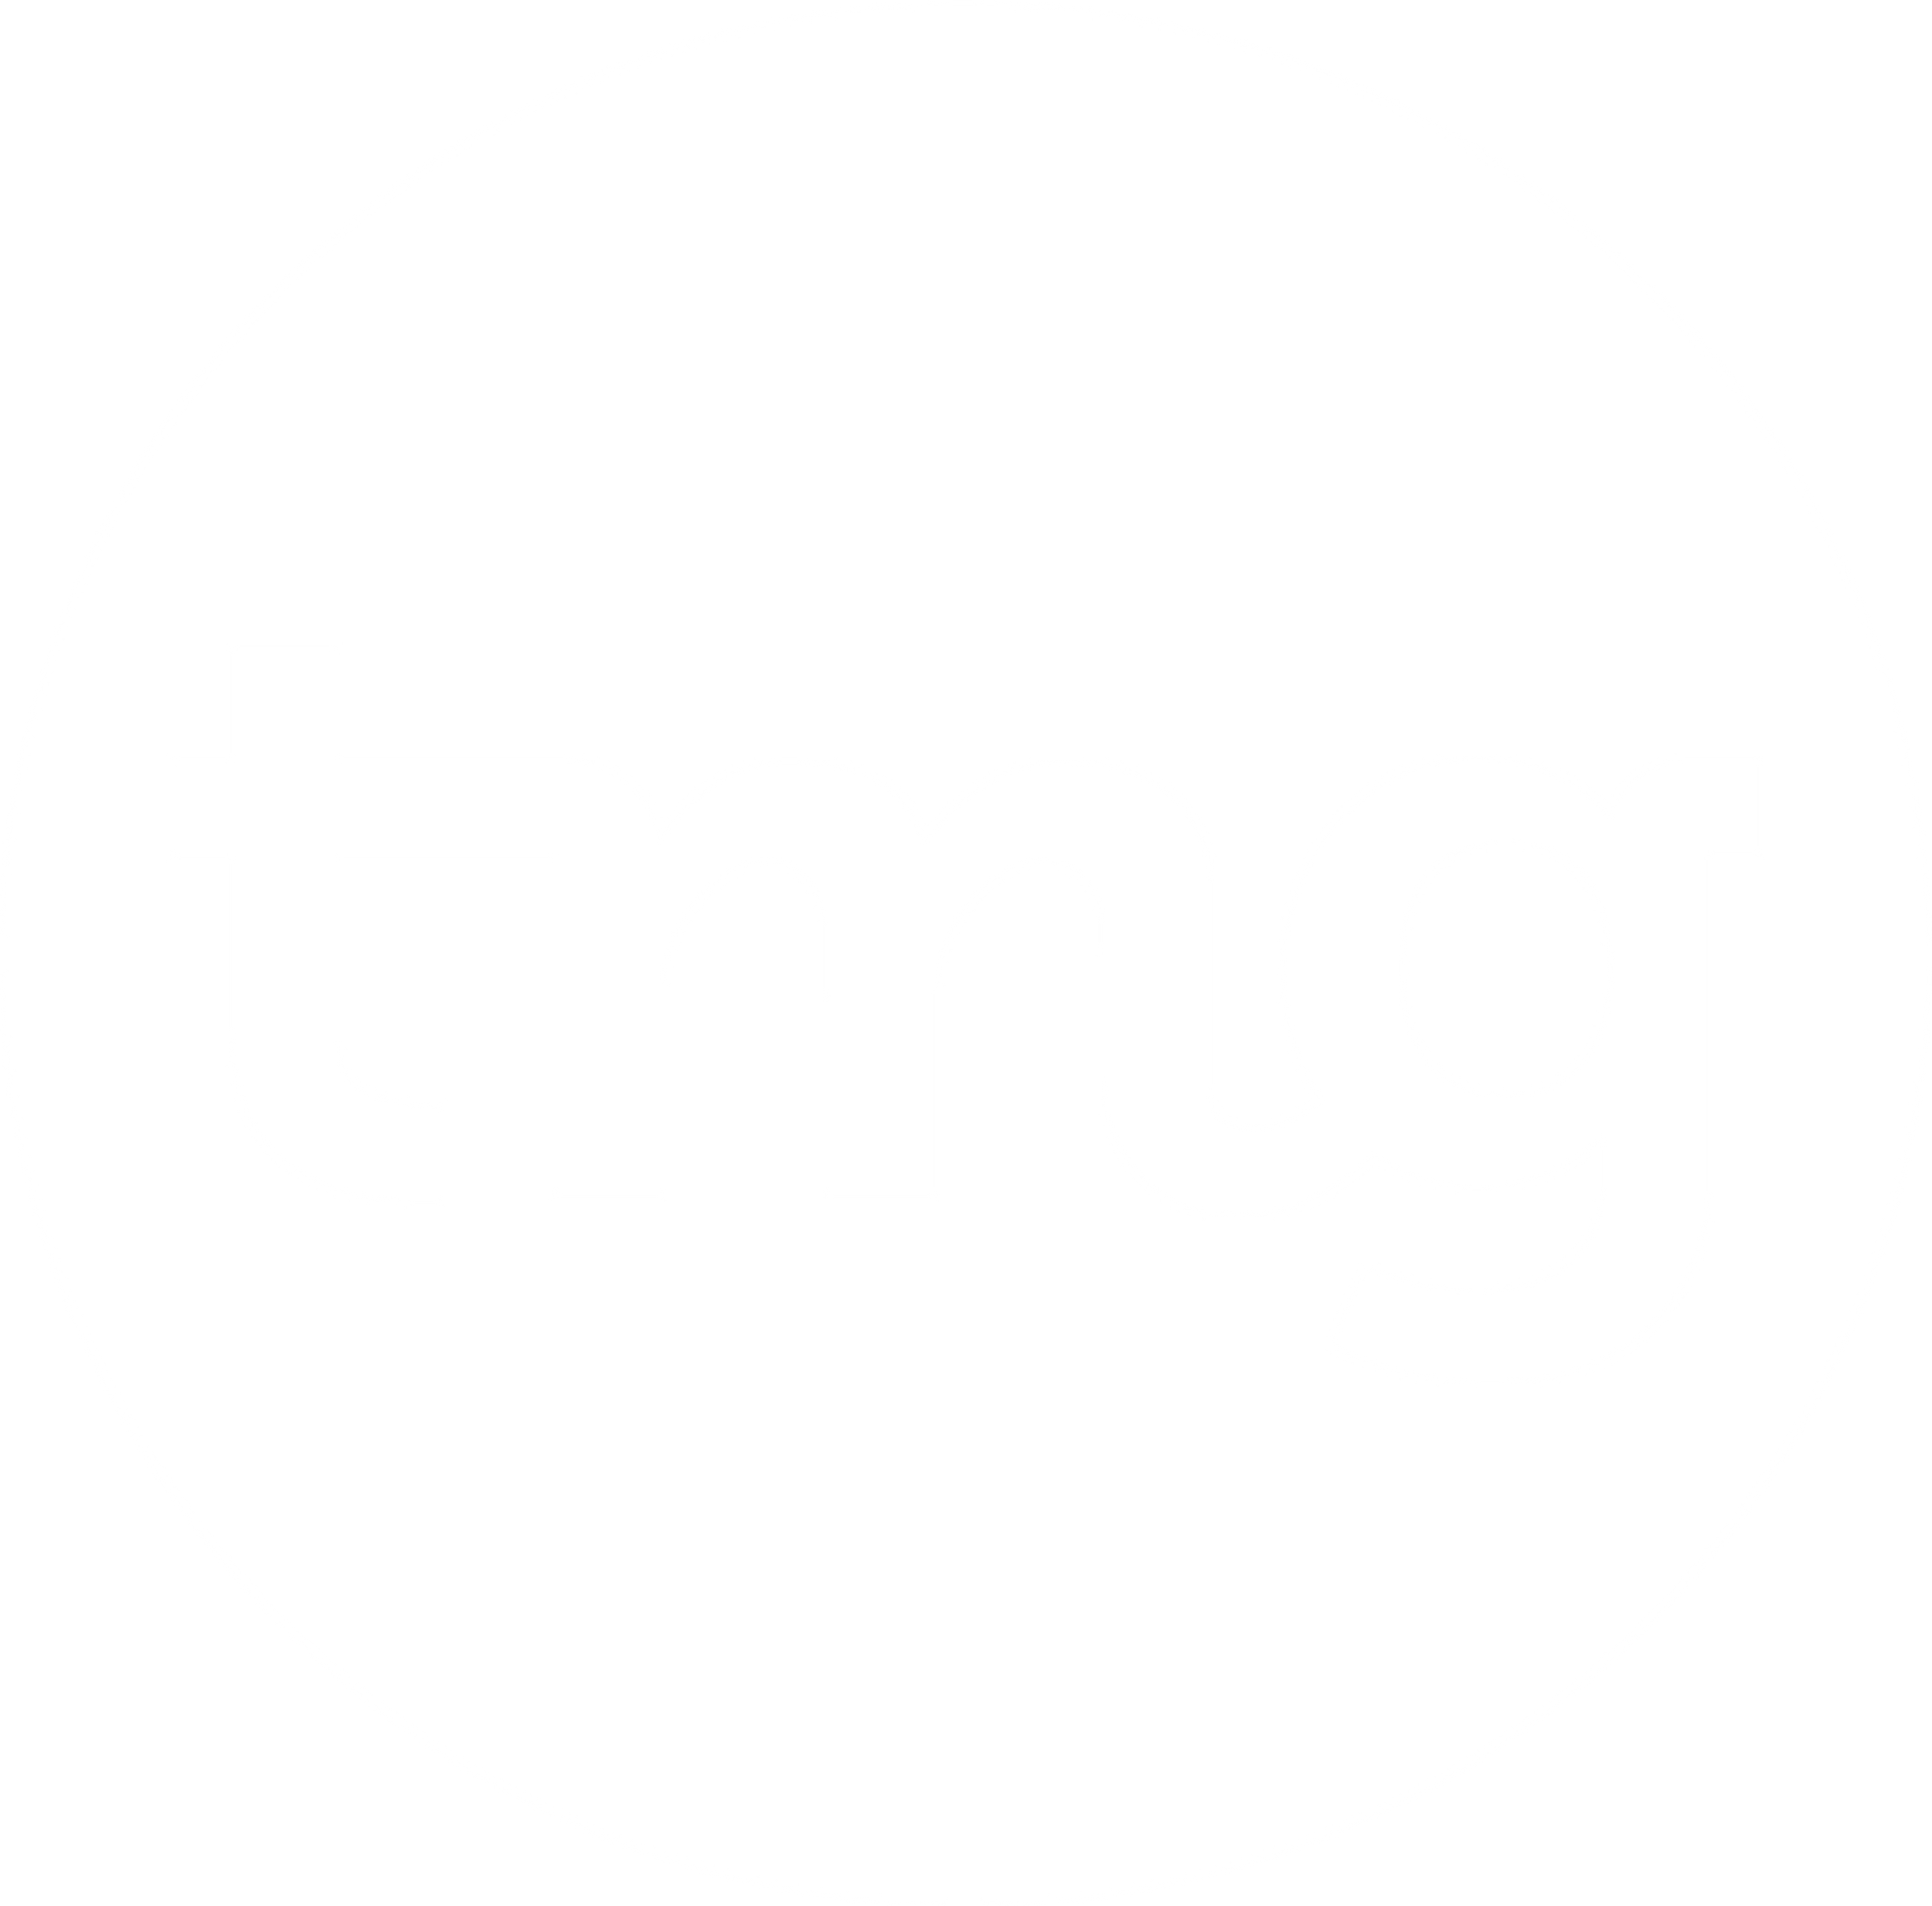 TMG improves startup time by over 35% with Mux Data